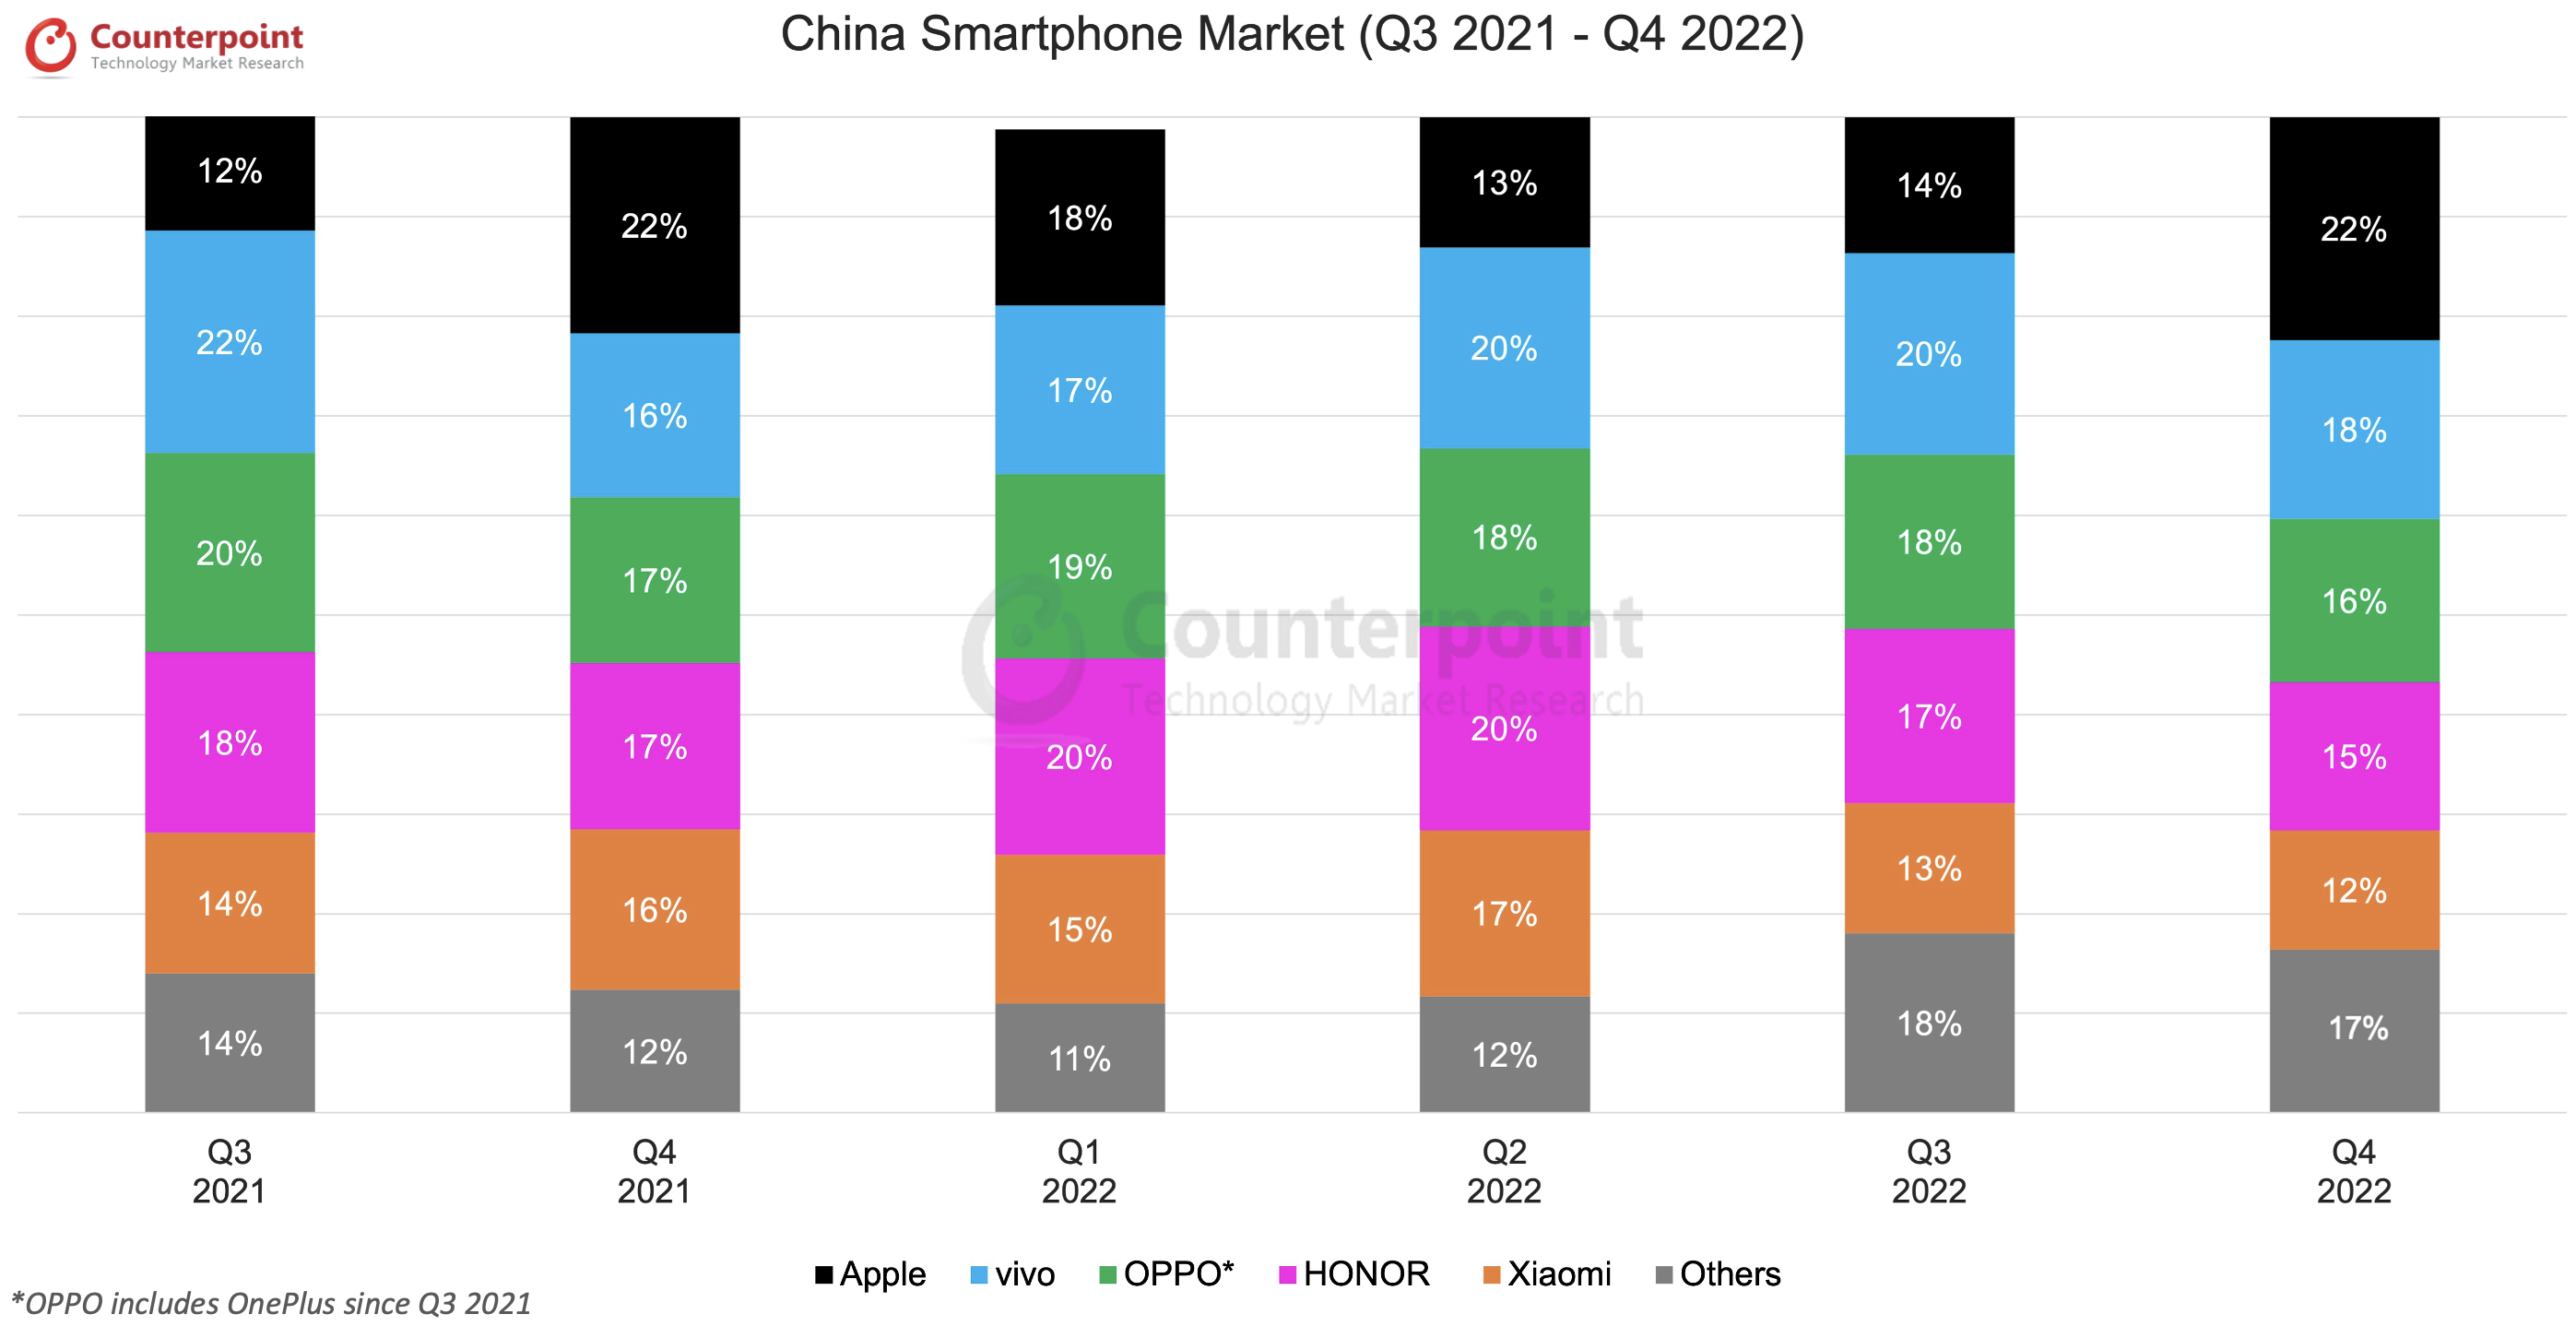 Counterpoint Research China Smartphone Market Share Q4 2022